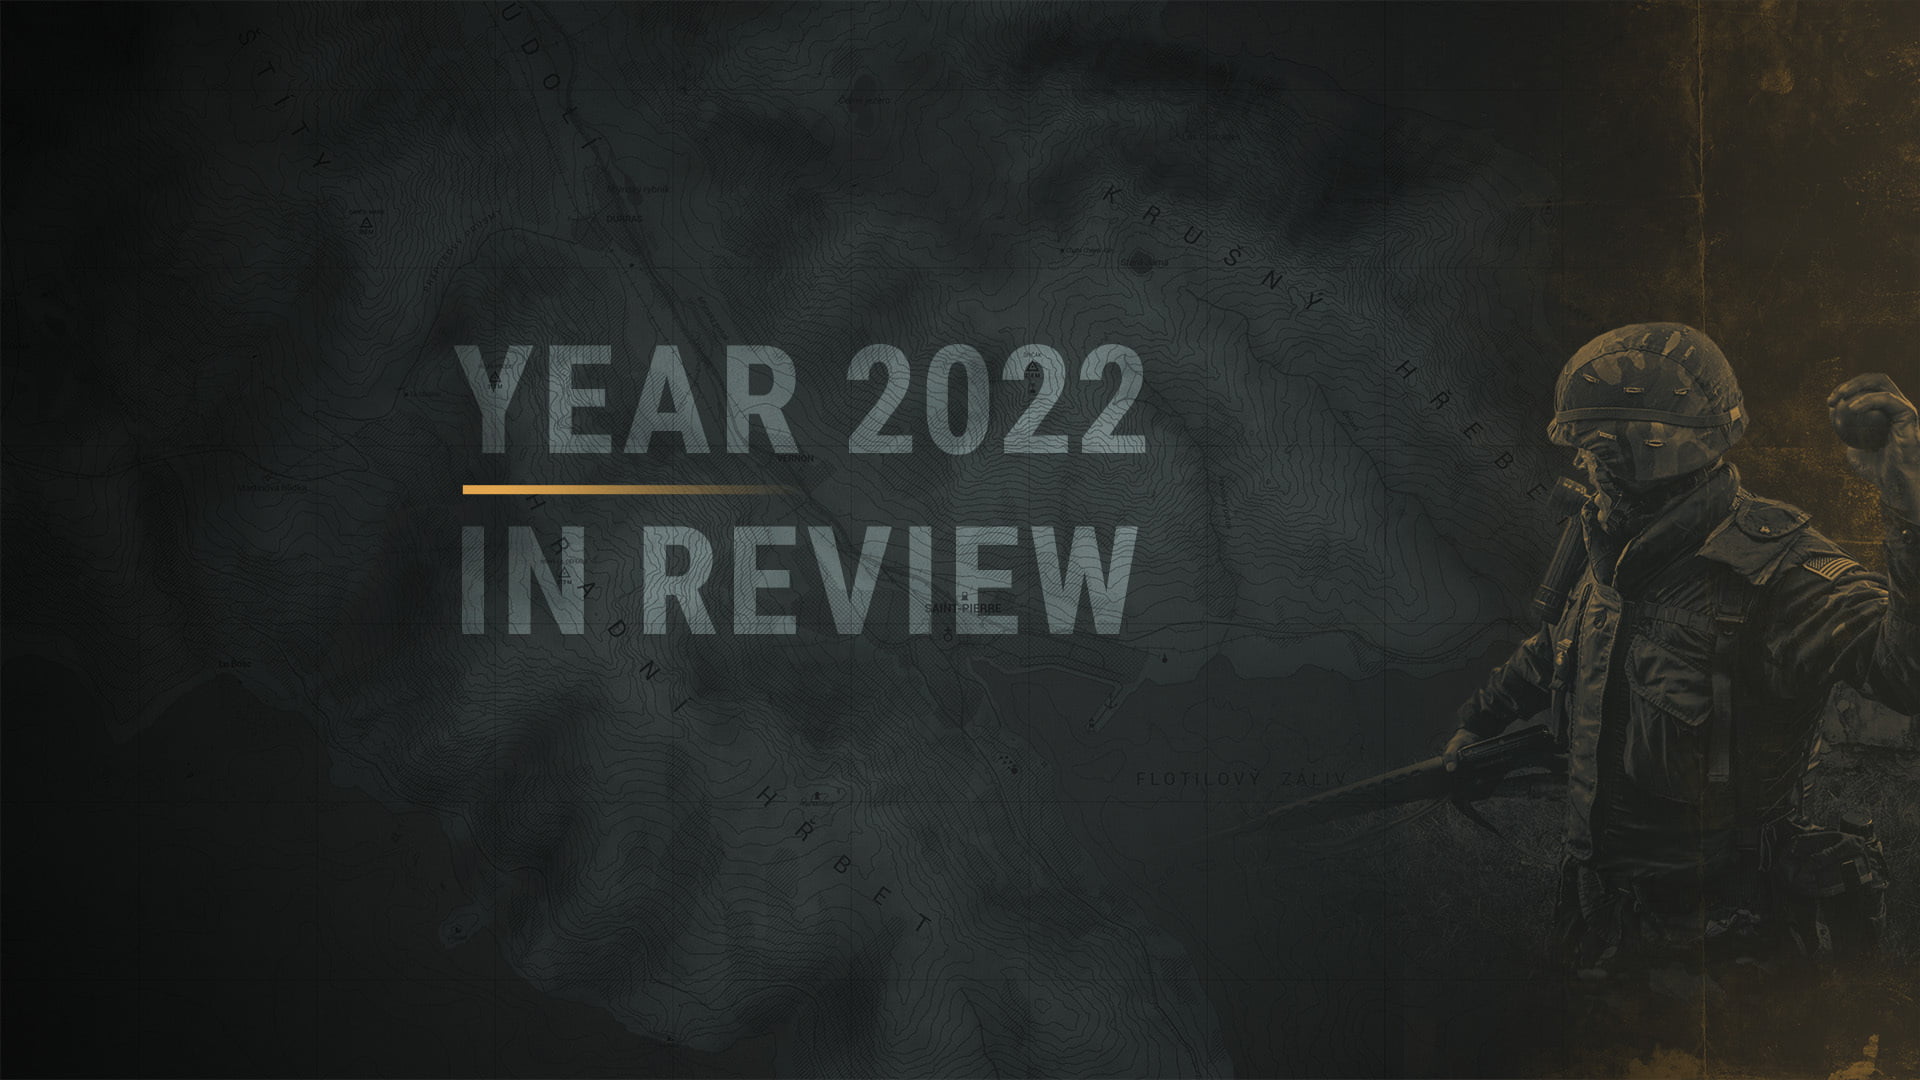 Cover image of Year 2022 in Review